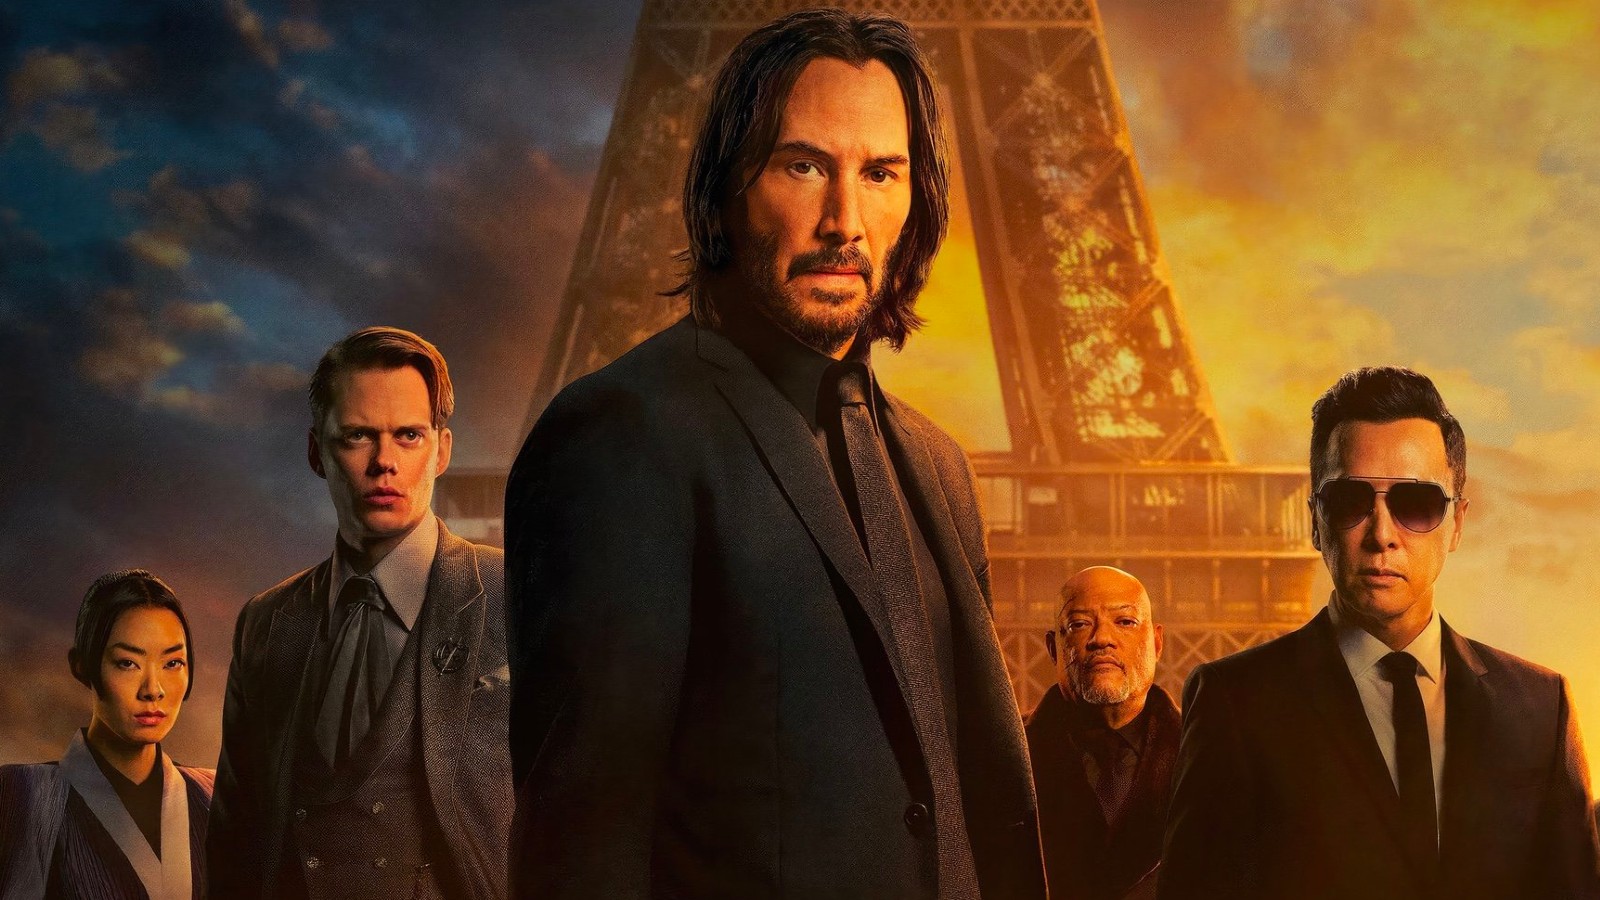 The Continental won't return for episode 4 but the John Wick franchise is  far from